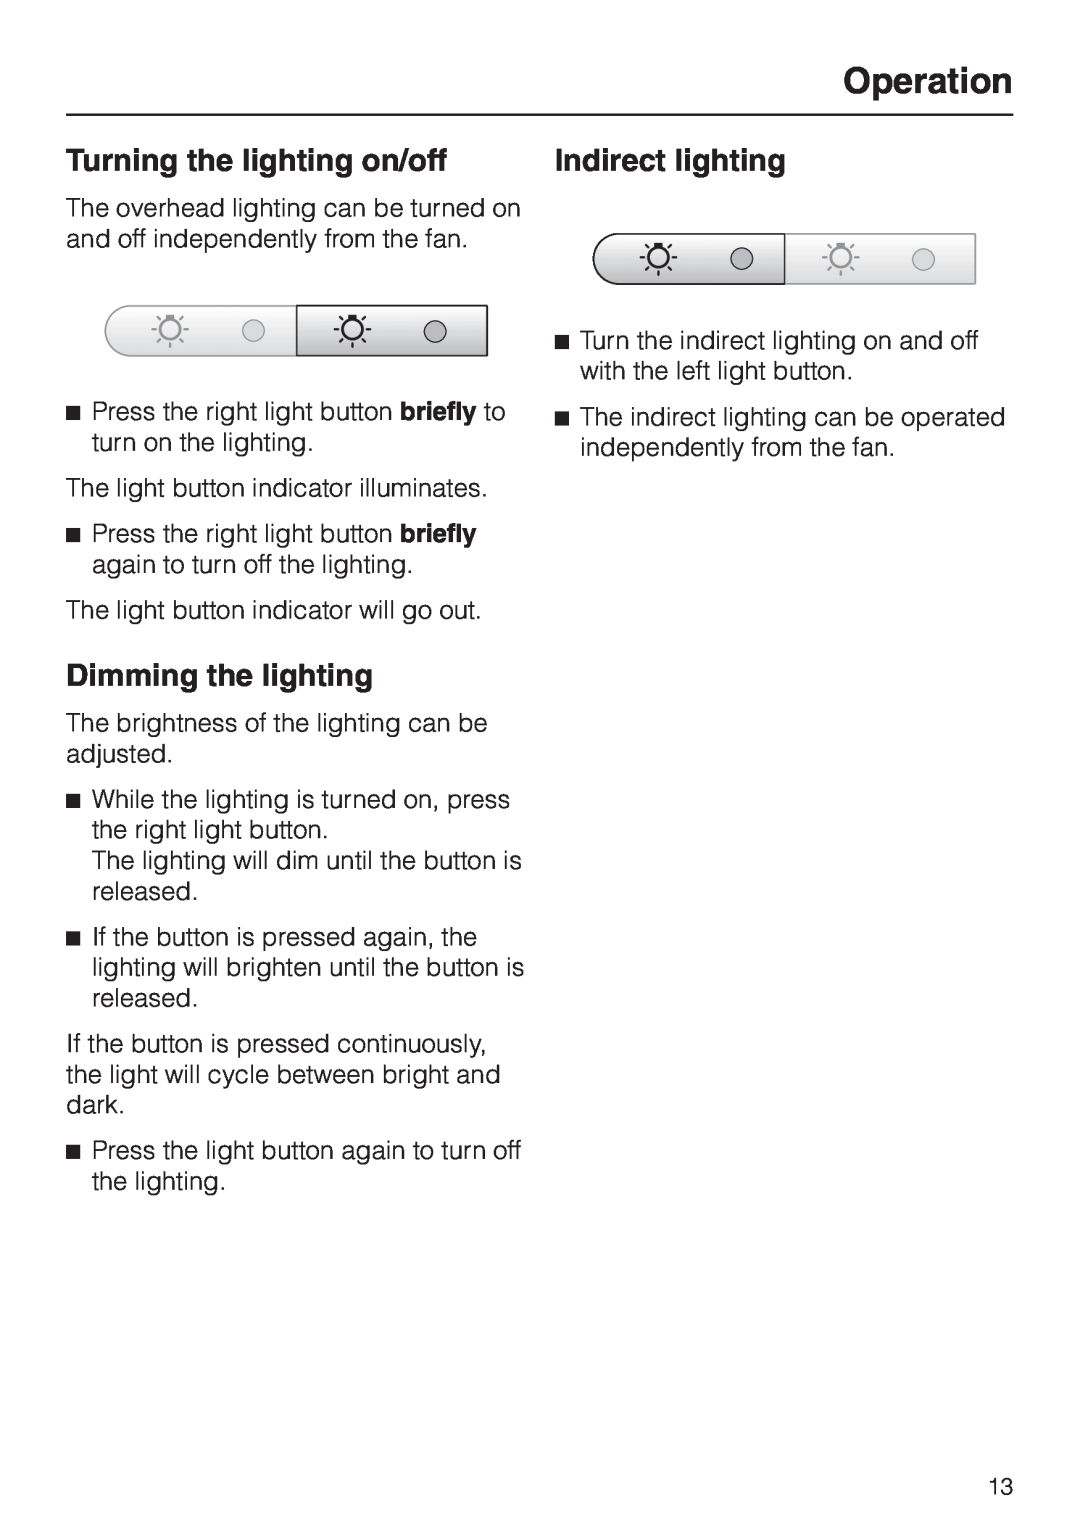 Miele DA 279-4 installation instructions Turning the lighting on/off, Indirect lighting, Dimming the lighting, Operation 